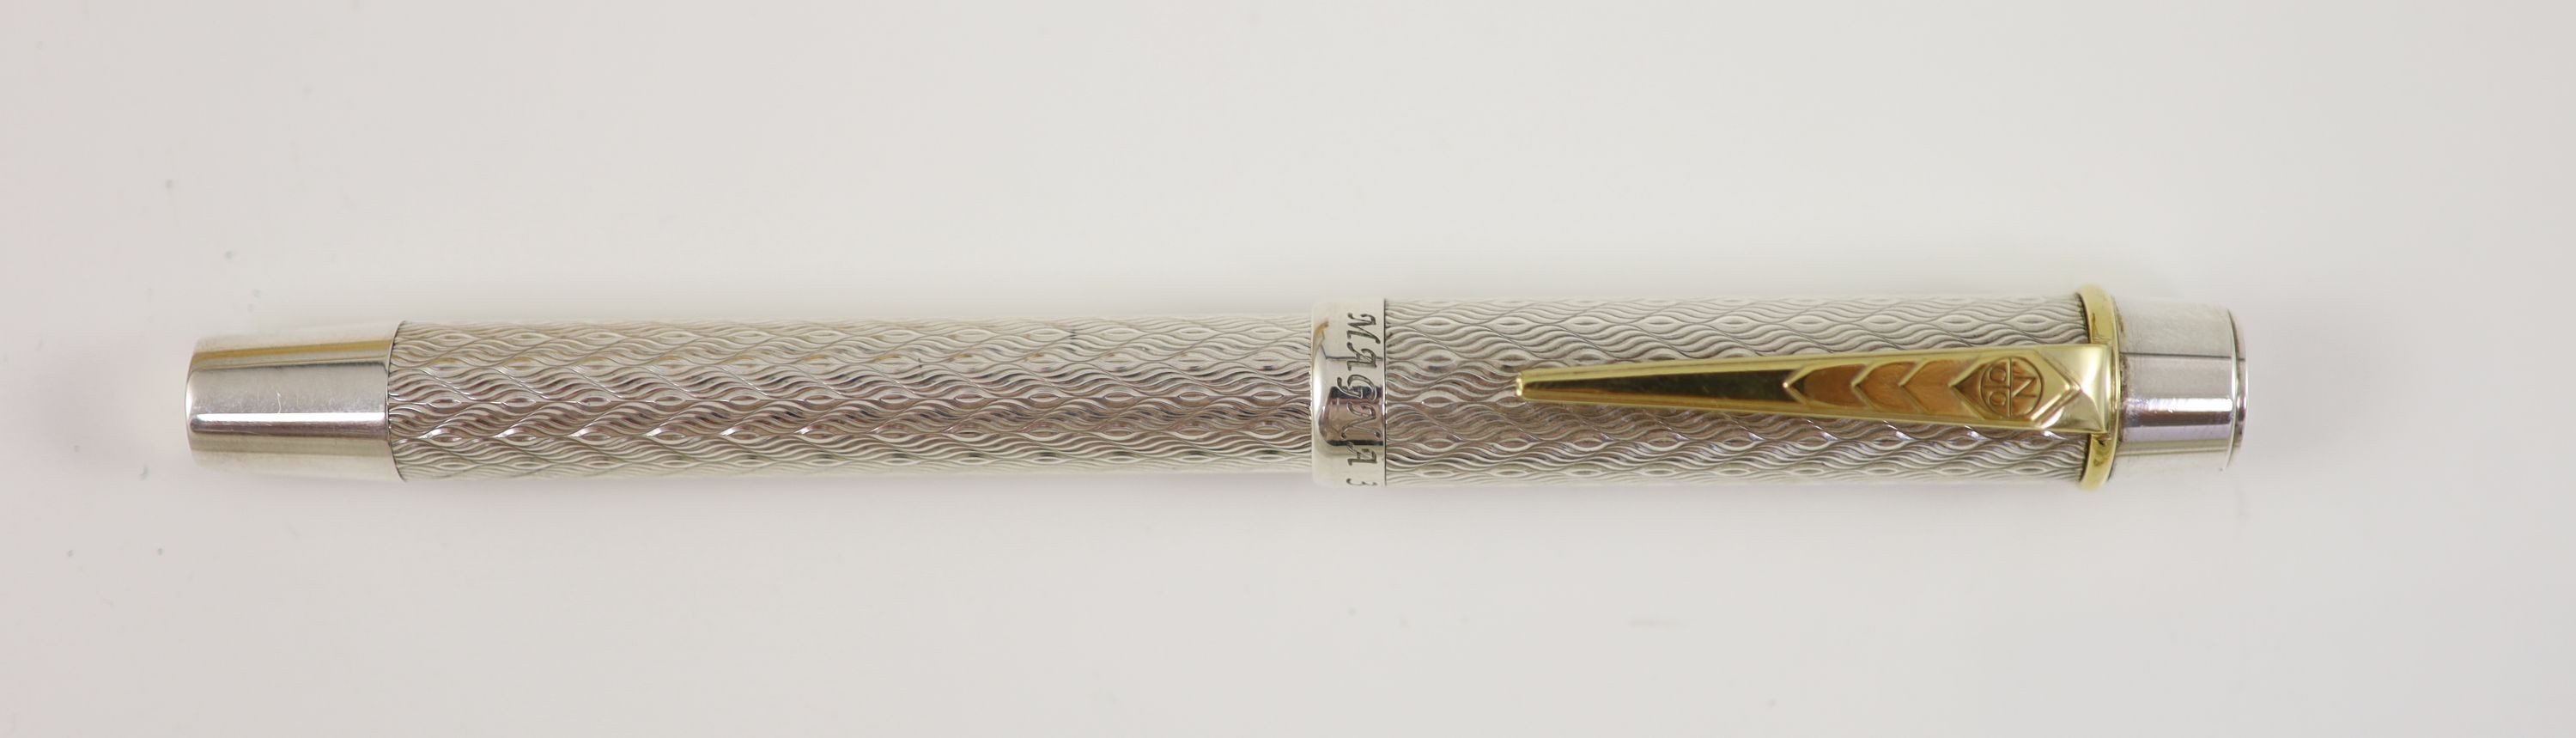 Onoto No.3 Prototype fountain pen, boxed with Onoto certificate, white metal casing - Image 2 of 6